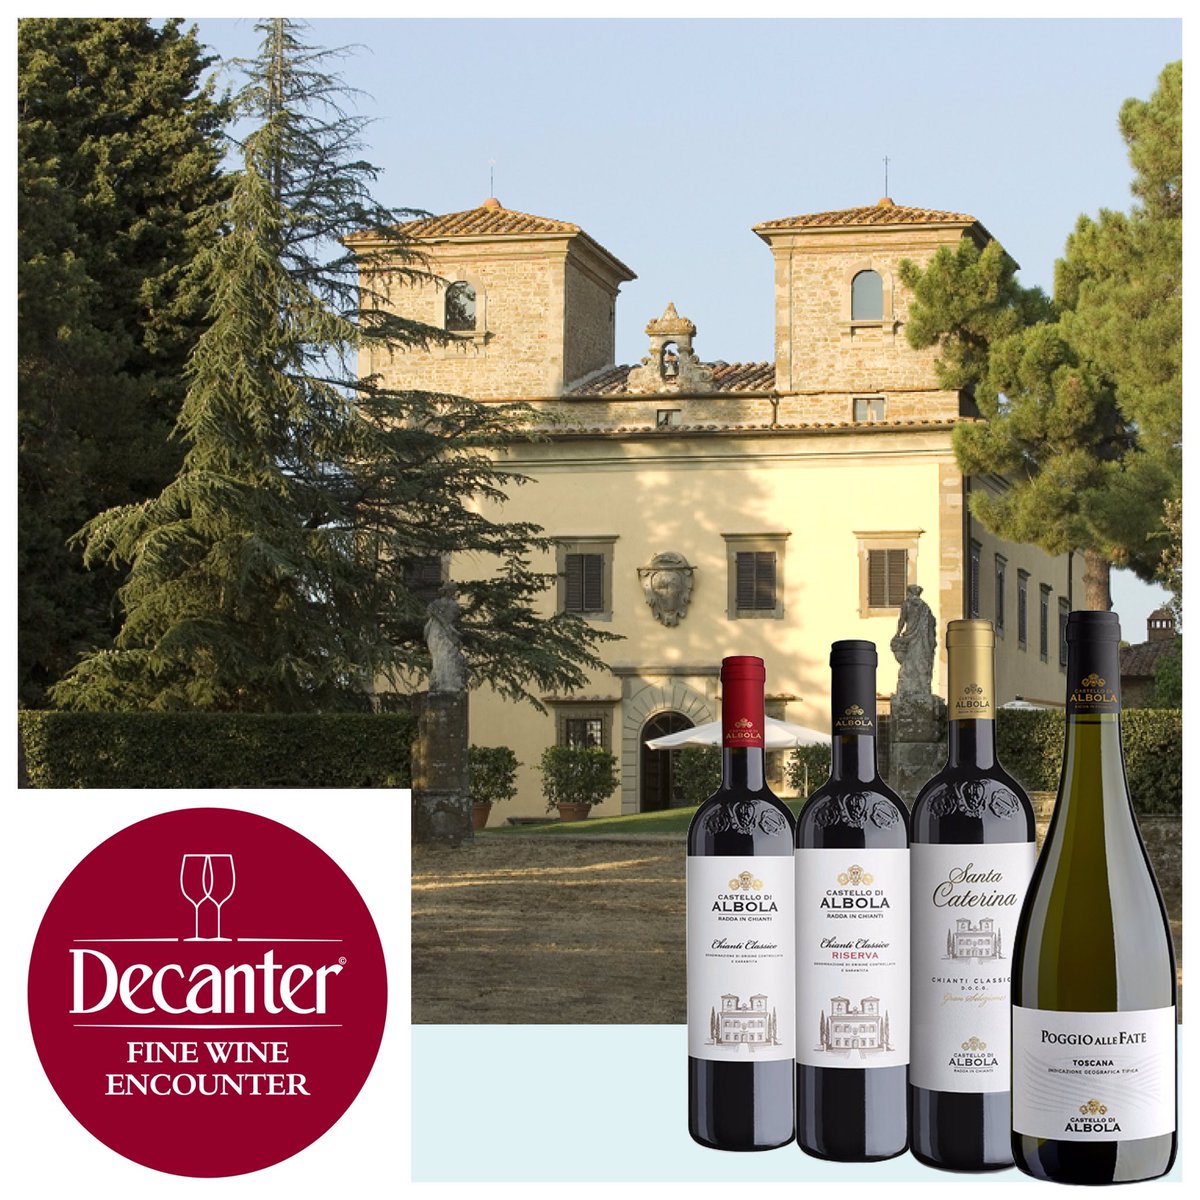 Hope to see you this weekend at @Decanter Fine Wine Encounter!